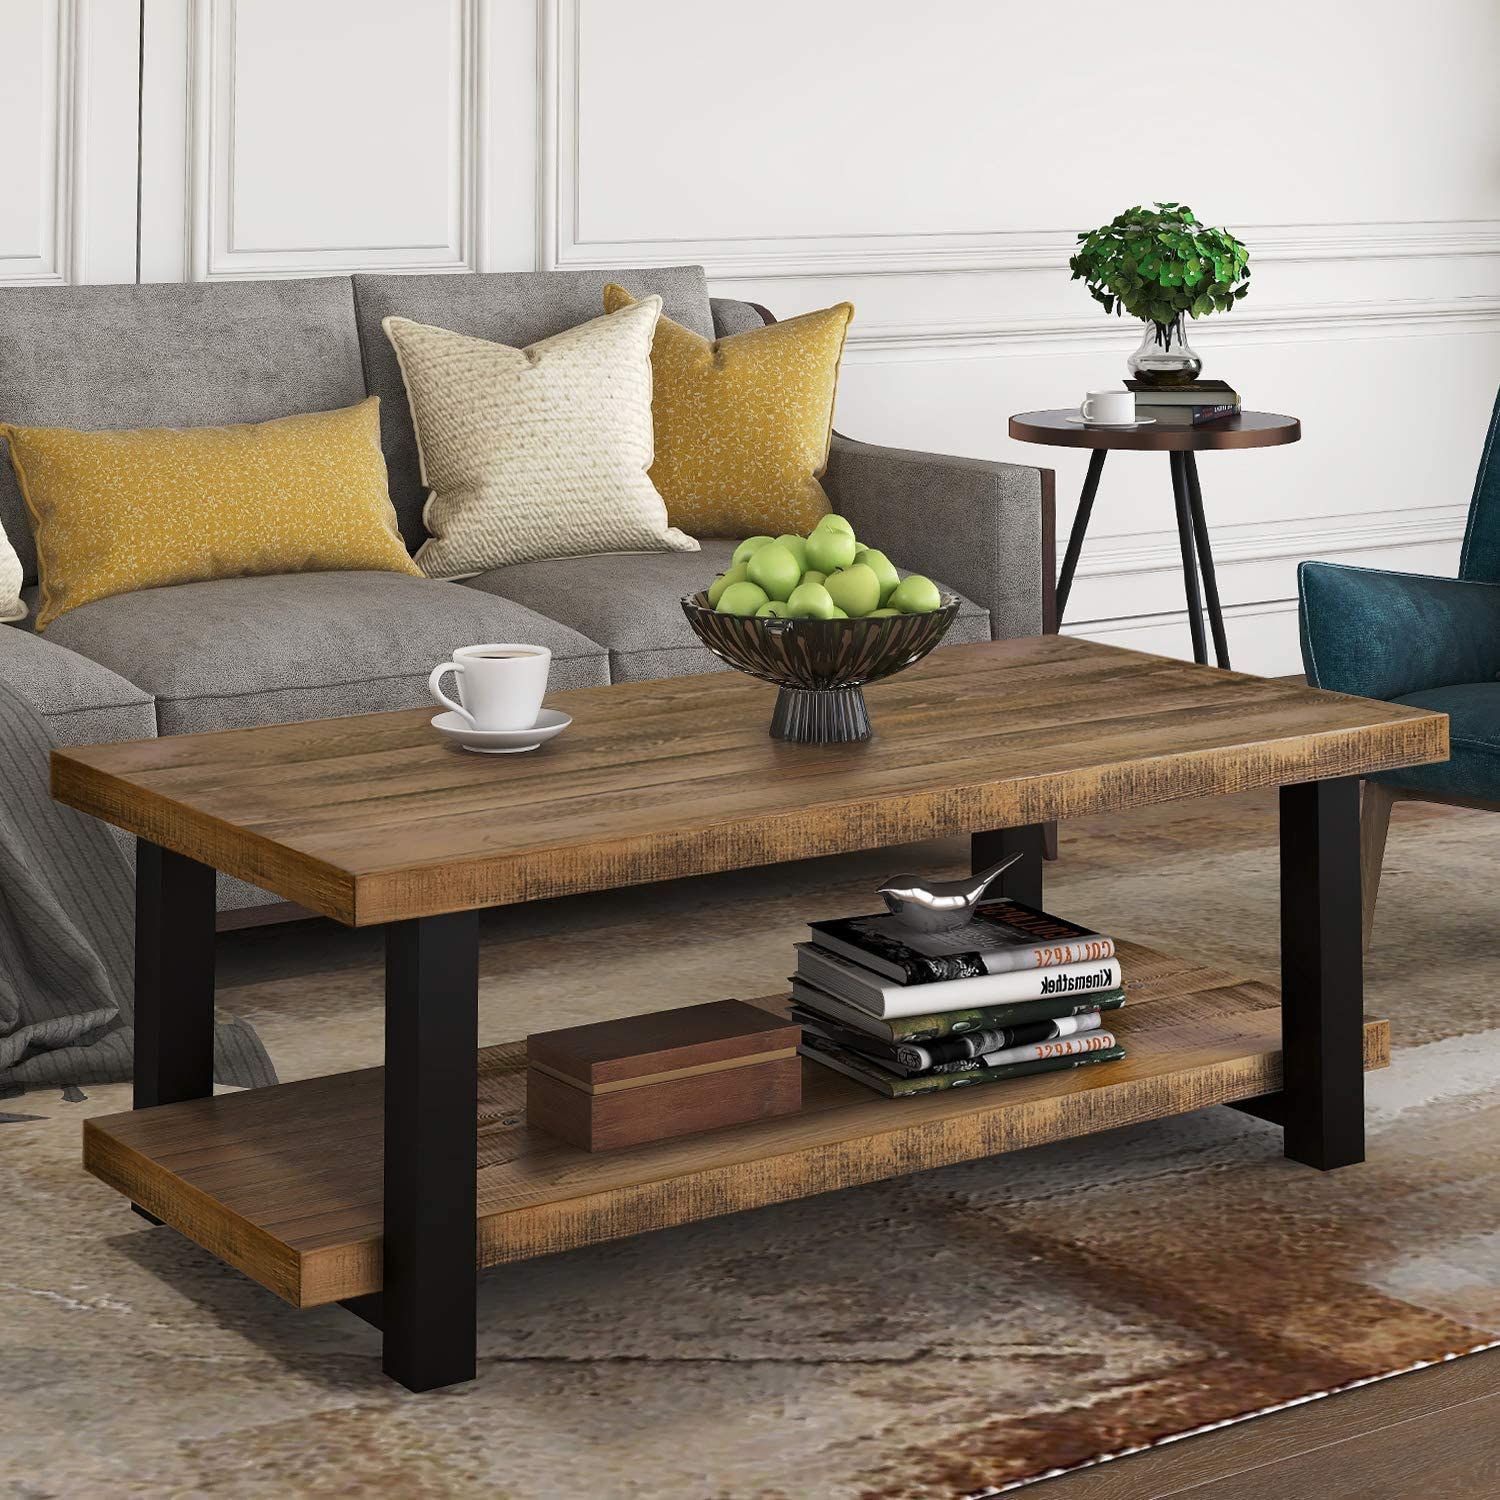 Choose The Perfect Style Coffee Table To Compliment Your Home – Coffee Pertaining To Coffee Tables With Solid Legs (Gallery 14 of 20)